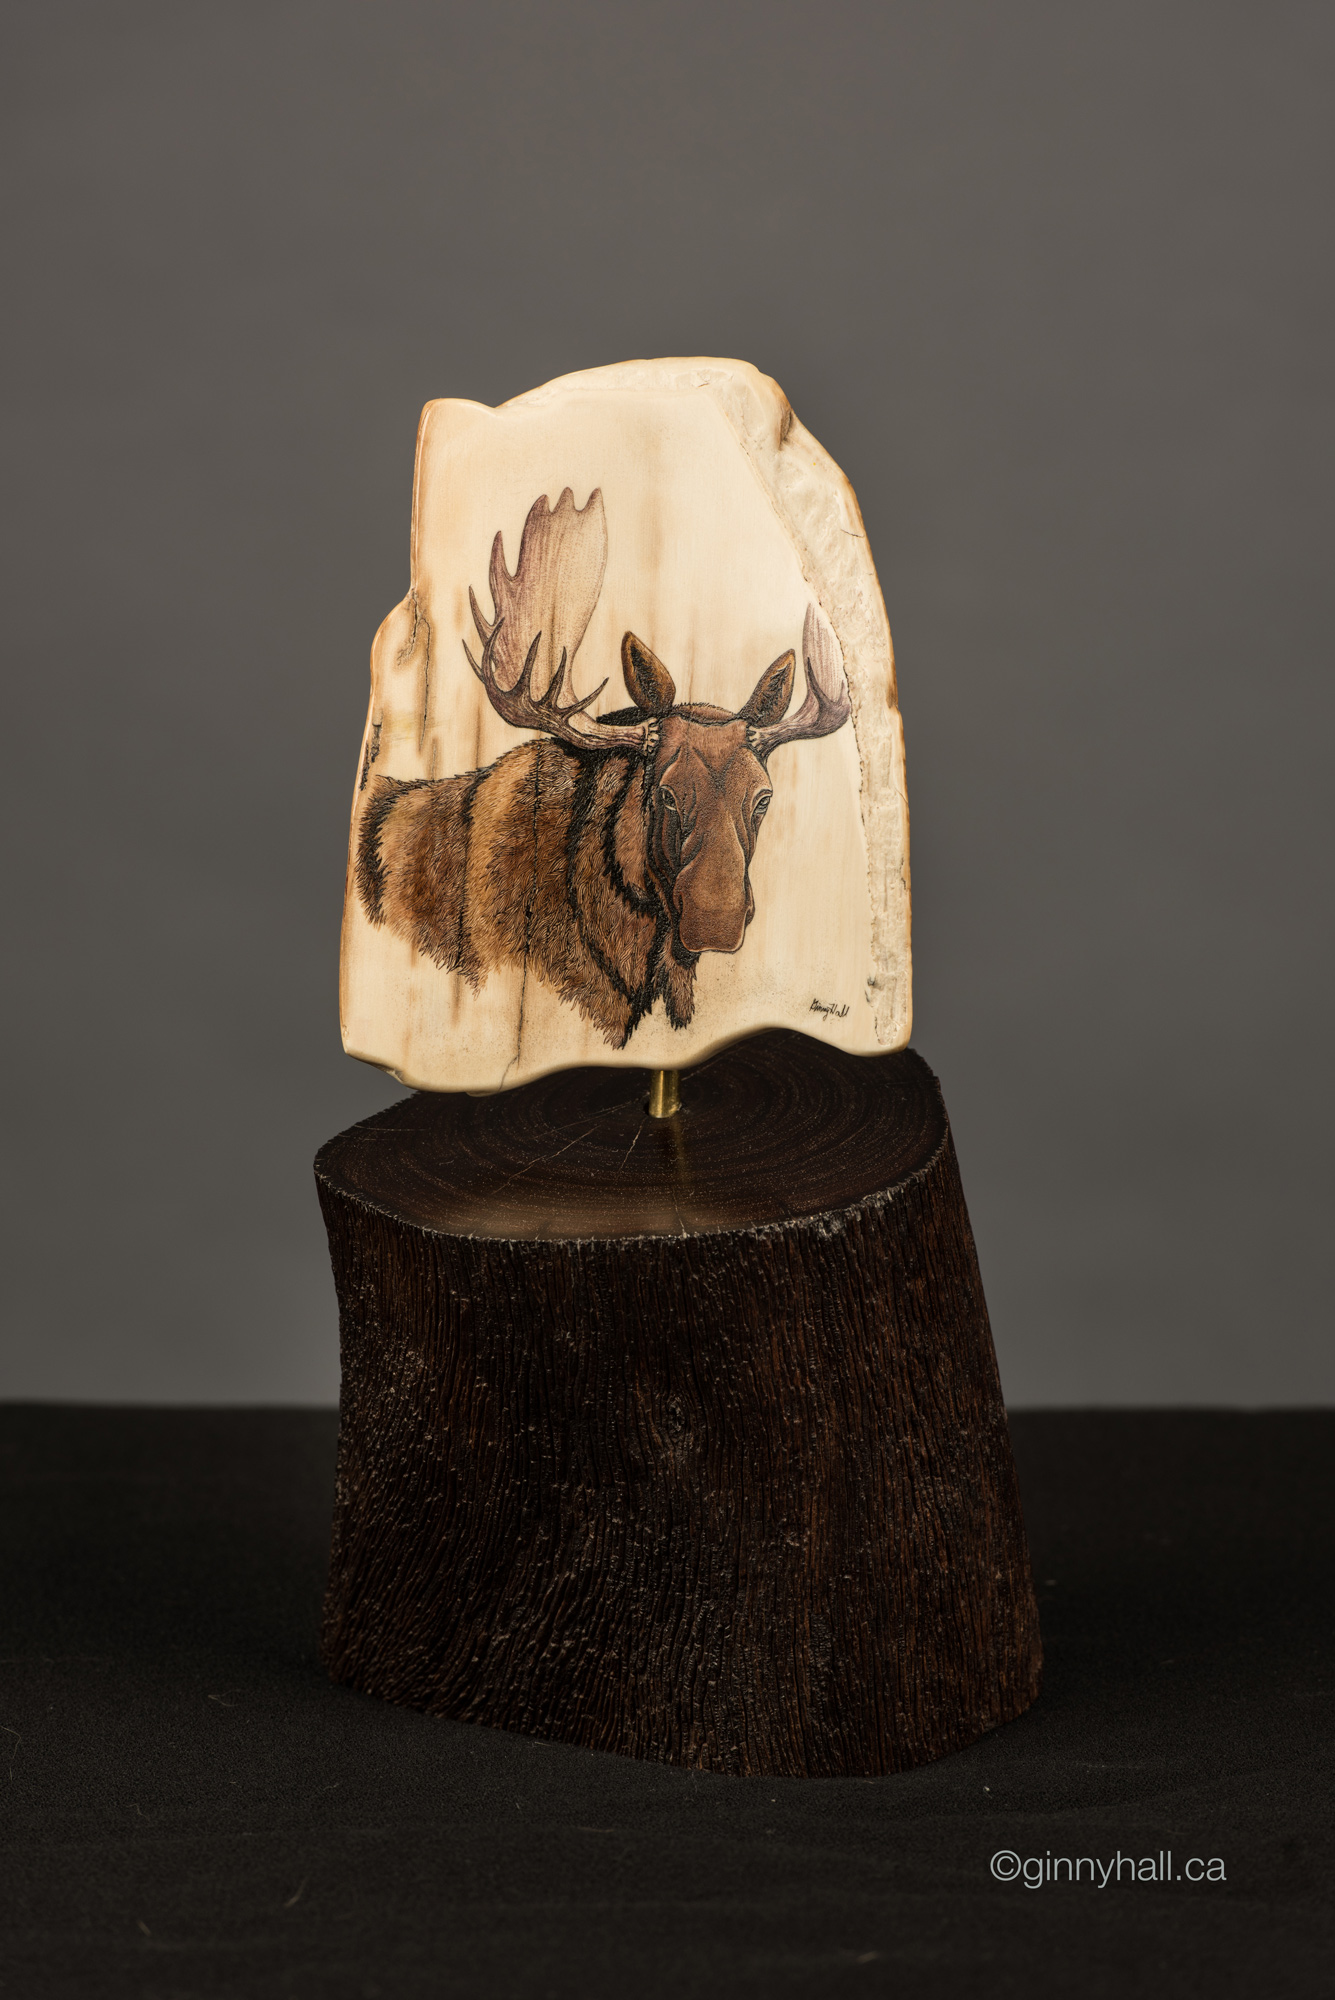 A scrimshaw peice by Ginny Hall depicting a moose.